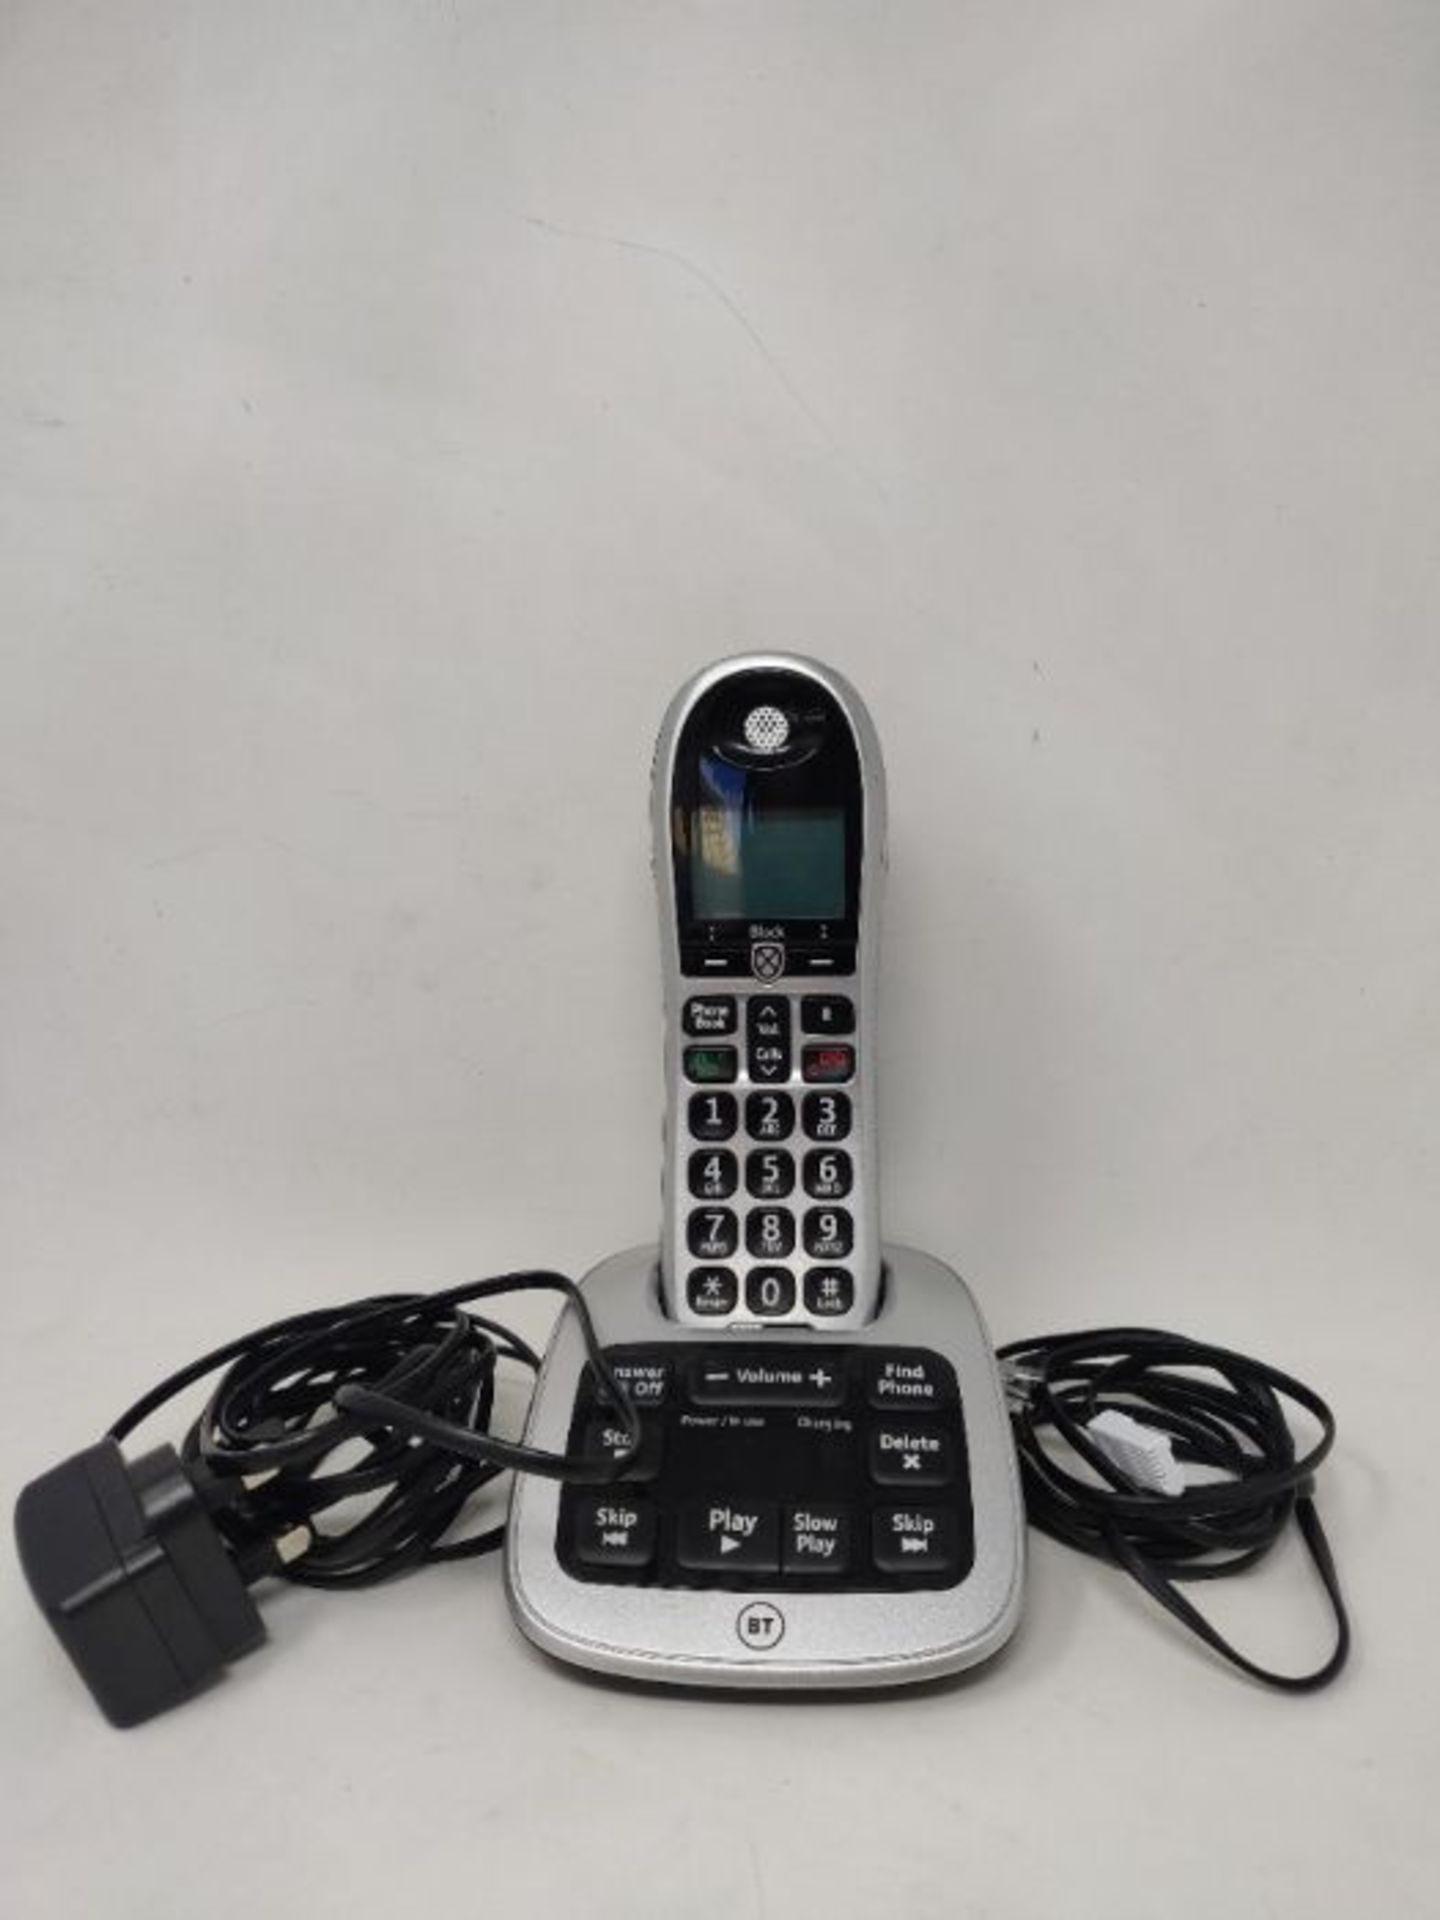 BT 4600 Big Button Advanced Call Blocker Home Phone with Answer Machine - Image 3 of 3